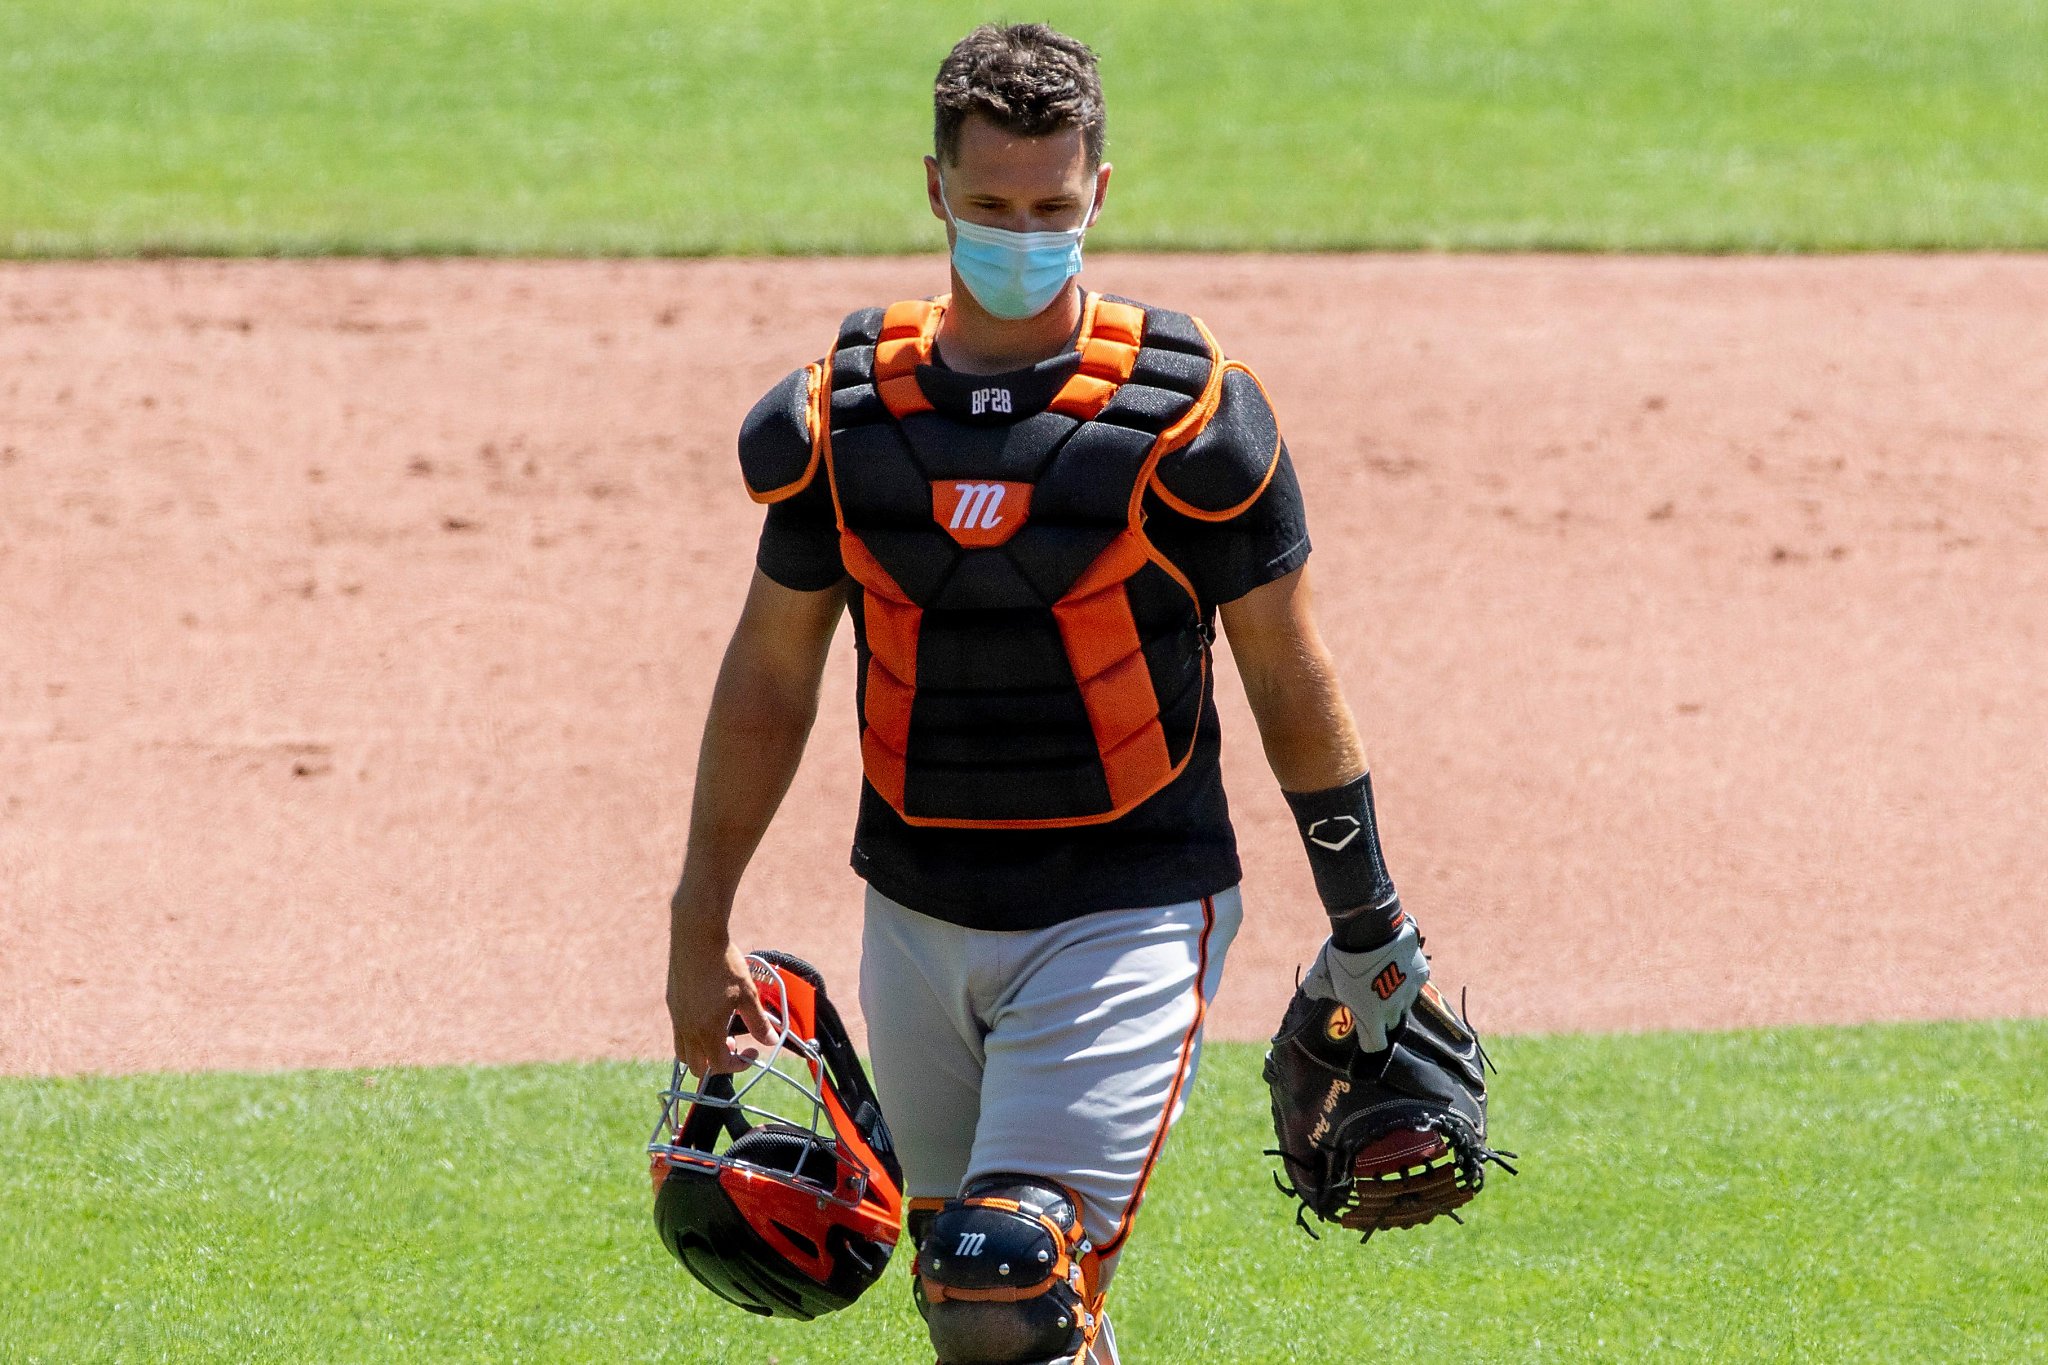 buster posey city connect jersey